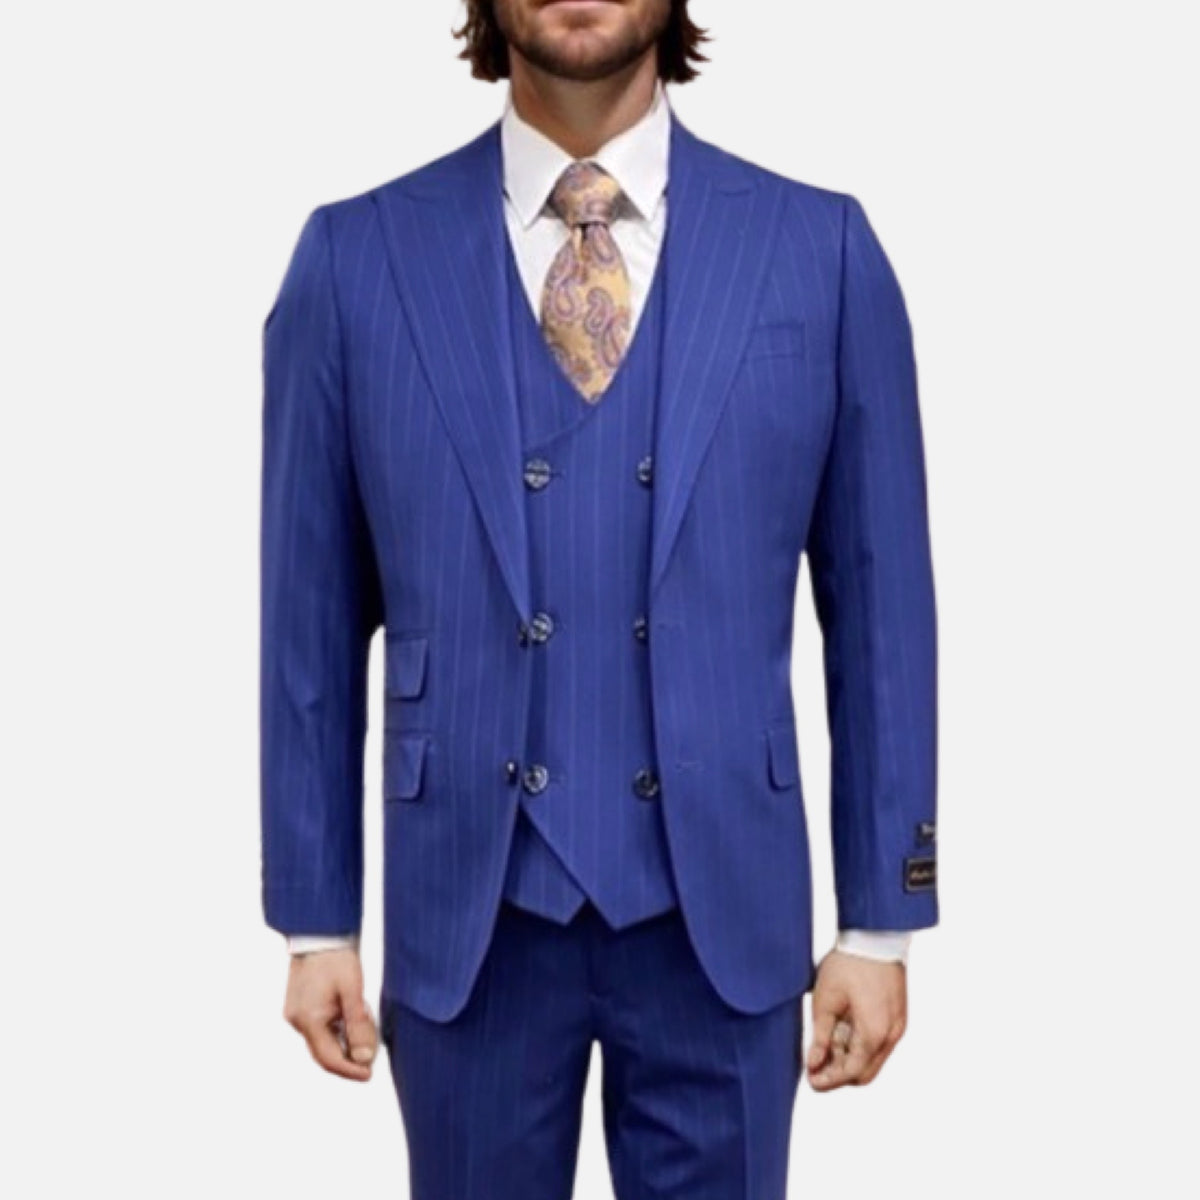 Mens Tiglio Rosso Modern Fit Suit - Blue Pinstripe 100% Wool 3-Piece